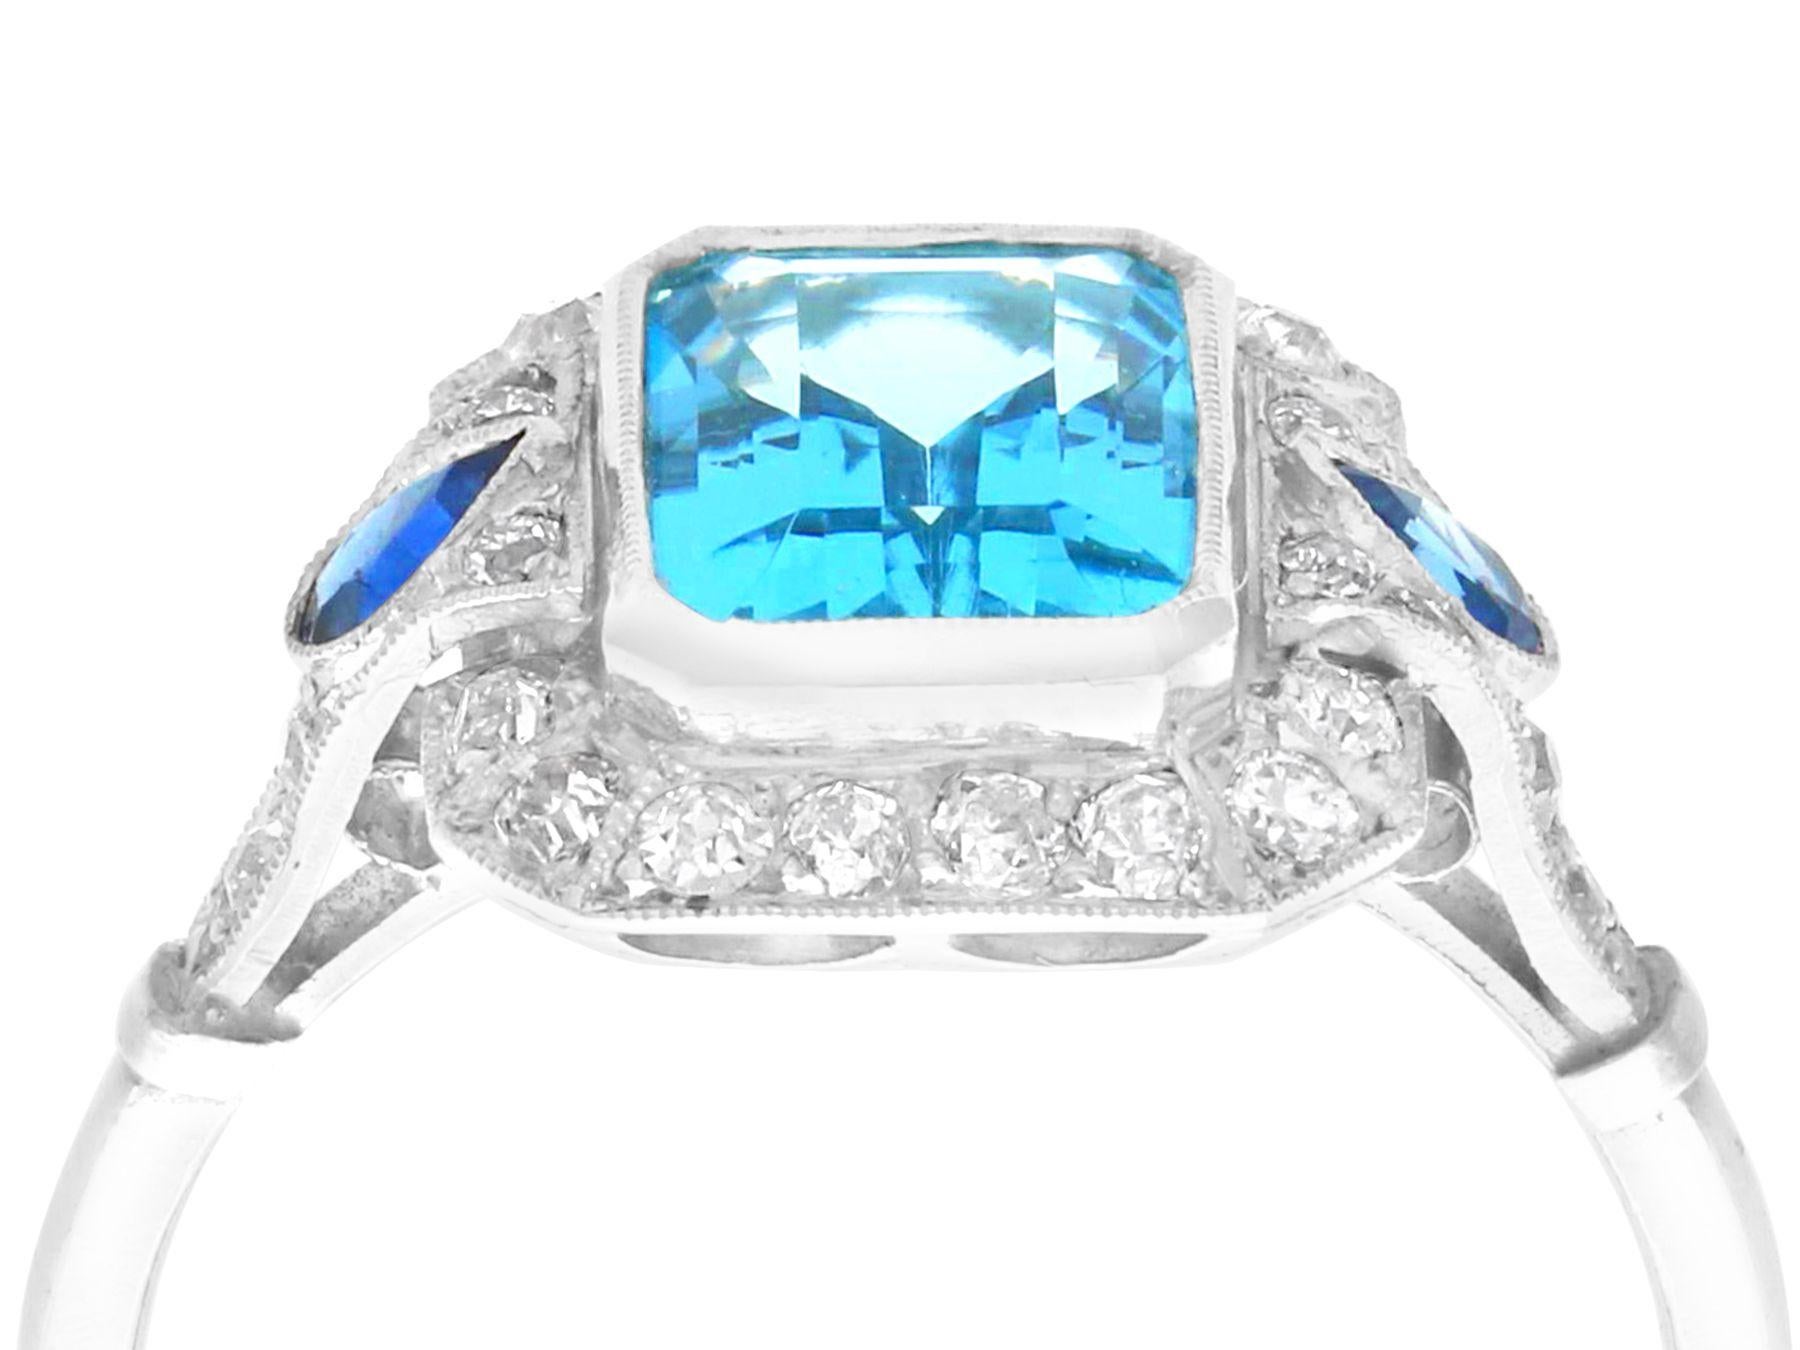 A stunning, fine and impressive 1.45 carat aquamarine, 0.14 sapphire and 0.38 carat diamond and platinum cocktail ring; part of our diverse gemstone jewelry and estate jewelry collections.

This stunning, fine and impressive aquamarine ring with